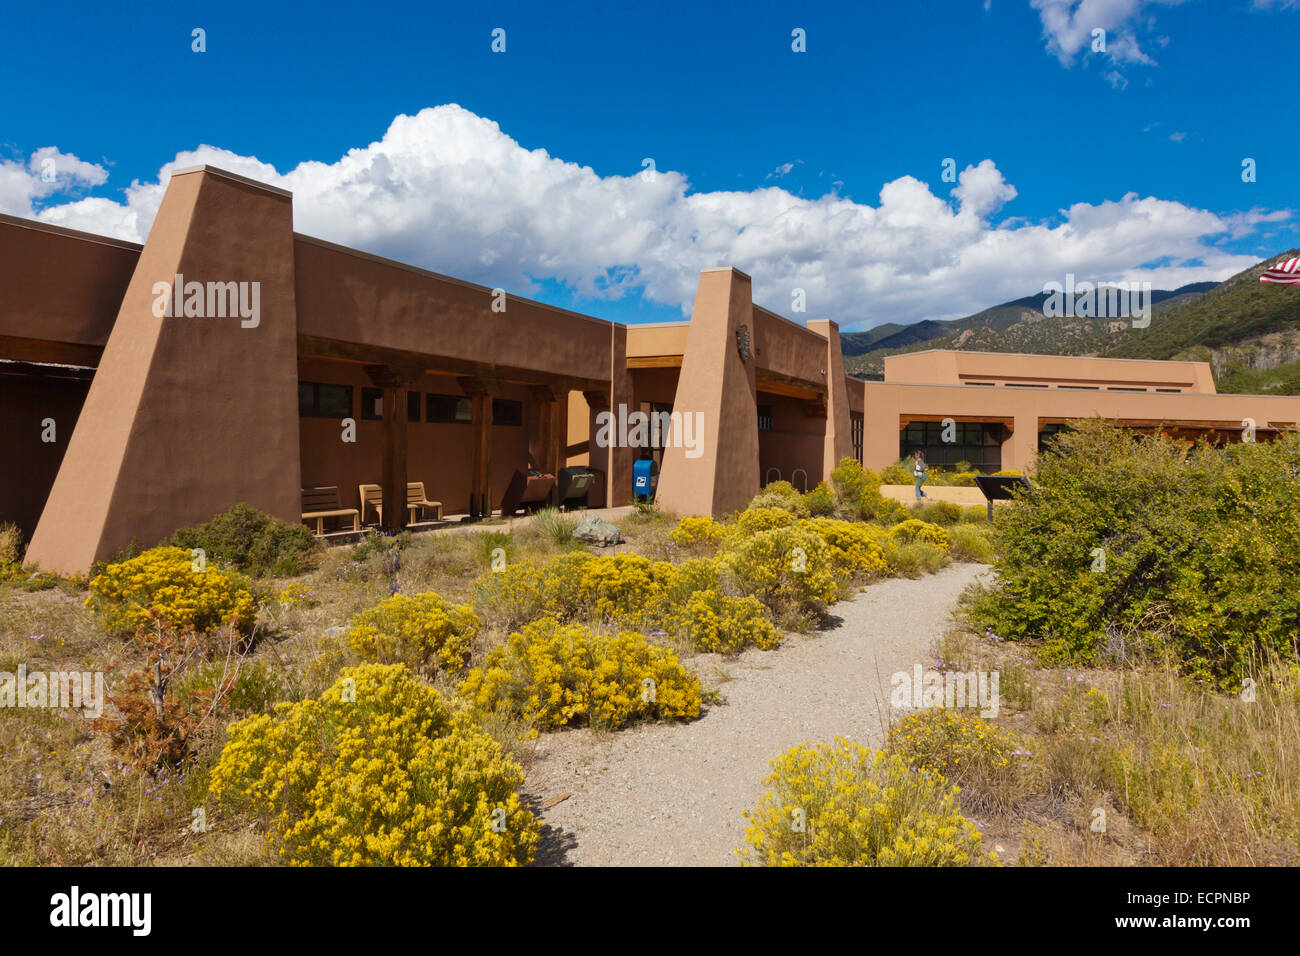 VISITORS CENTER at the GREAT SAND DUNES NATIONAL PARK - COLORADO Stock Photo